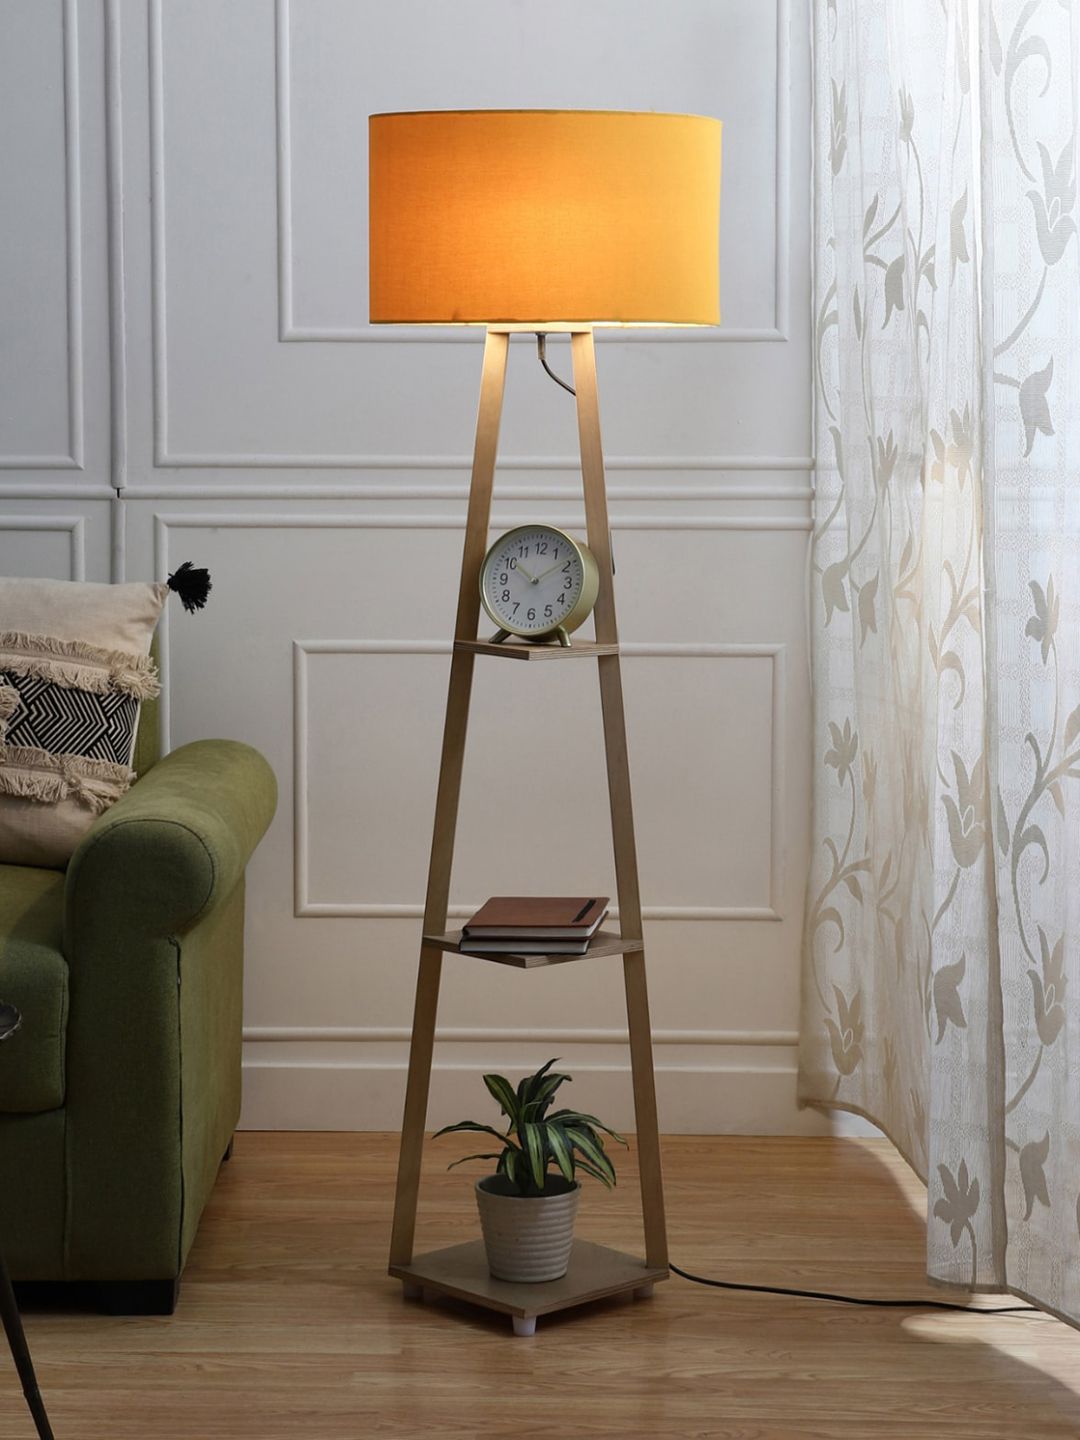 SANDED EDGE Orange 3 Tier Shelf Space Cylindrical Contemporary Floor Lamp Price in India